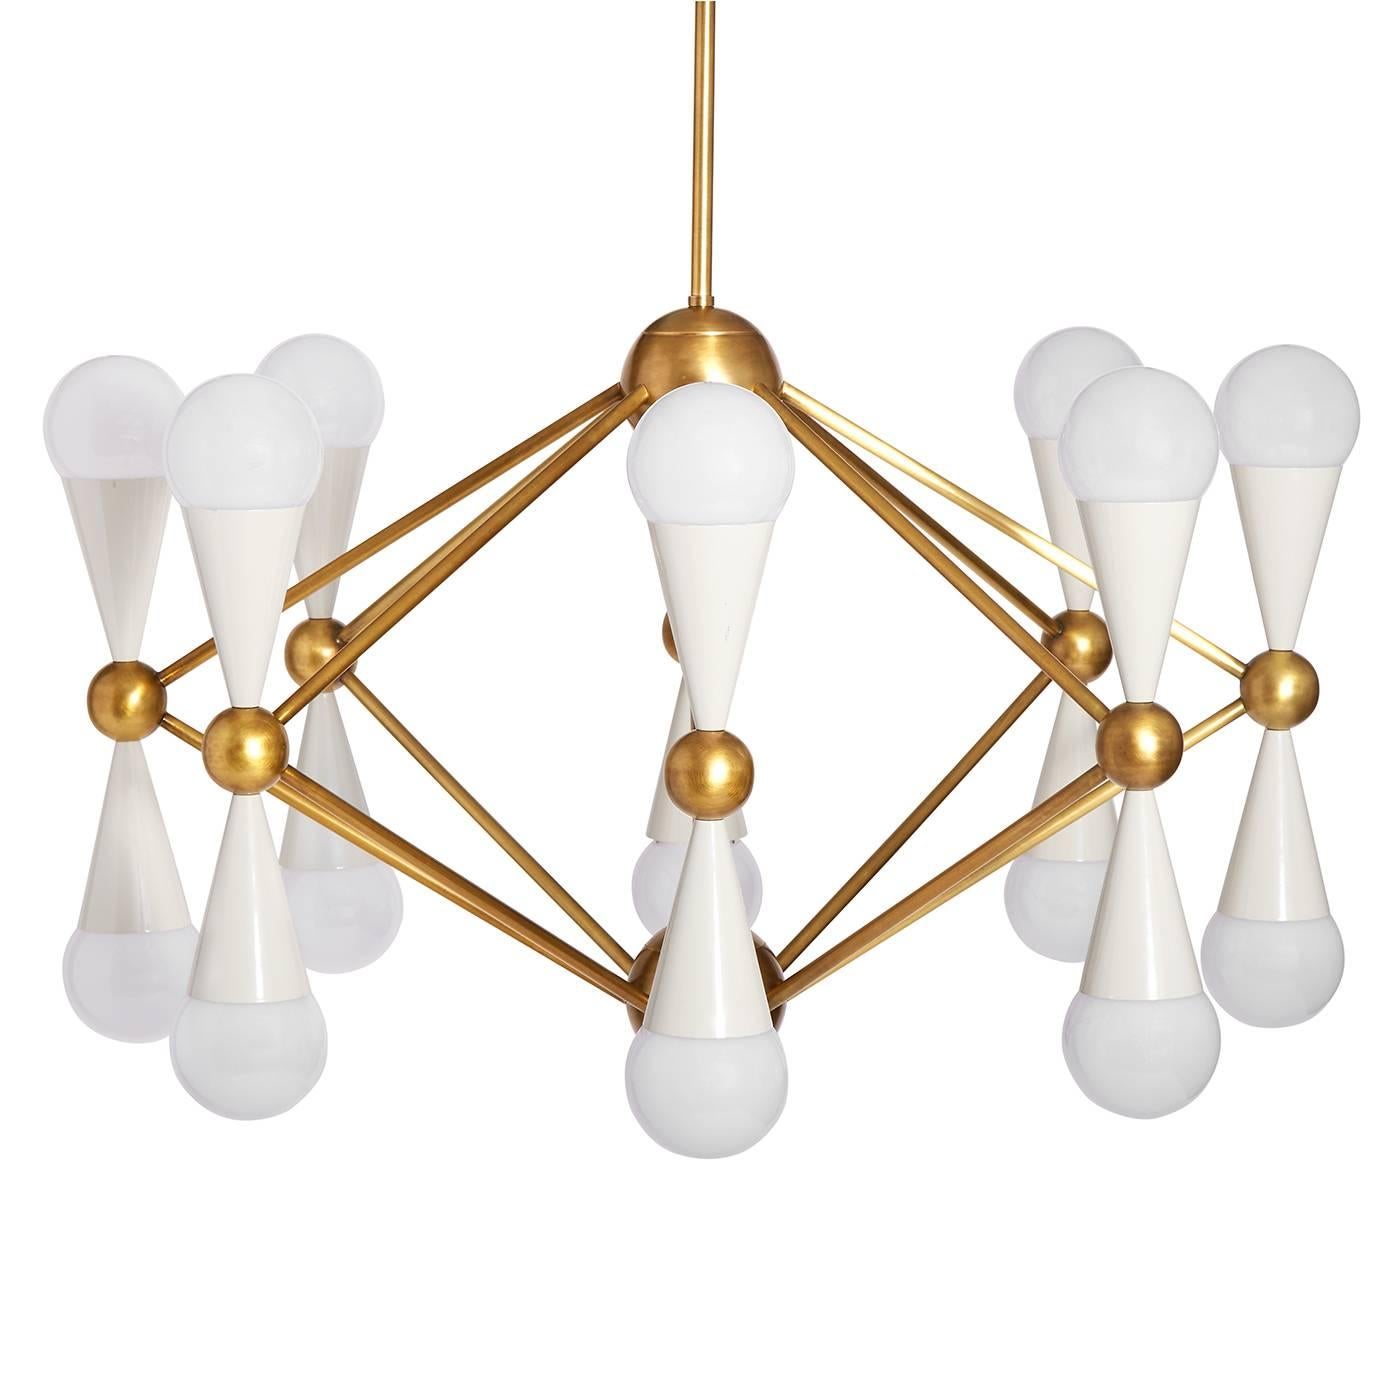 Kinetic modernism. Simple geometric shapes cones and spheres collide with dynamic results. Ideal scale for a dining room or a spacious foyer, the architectural Caracas sixteen-light chandelier will wow your world. Antiqued brass and glossy white